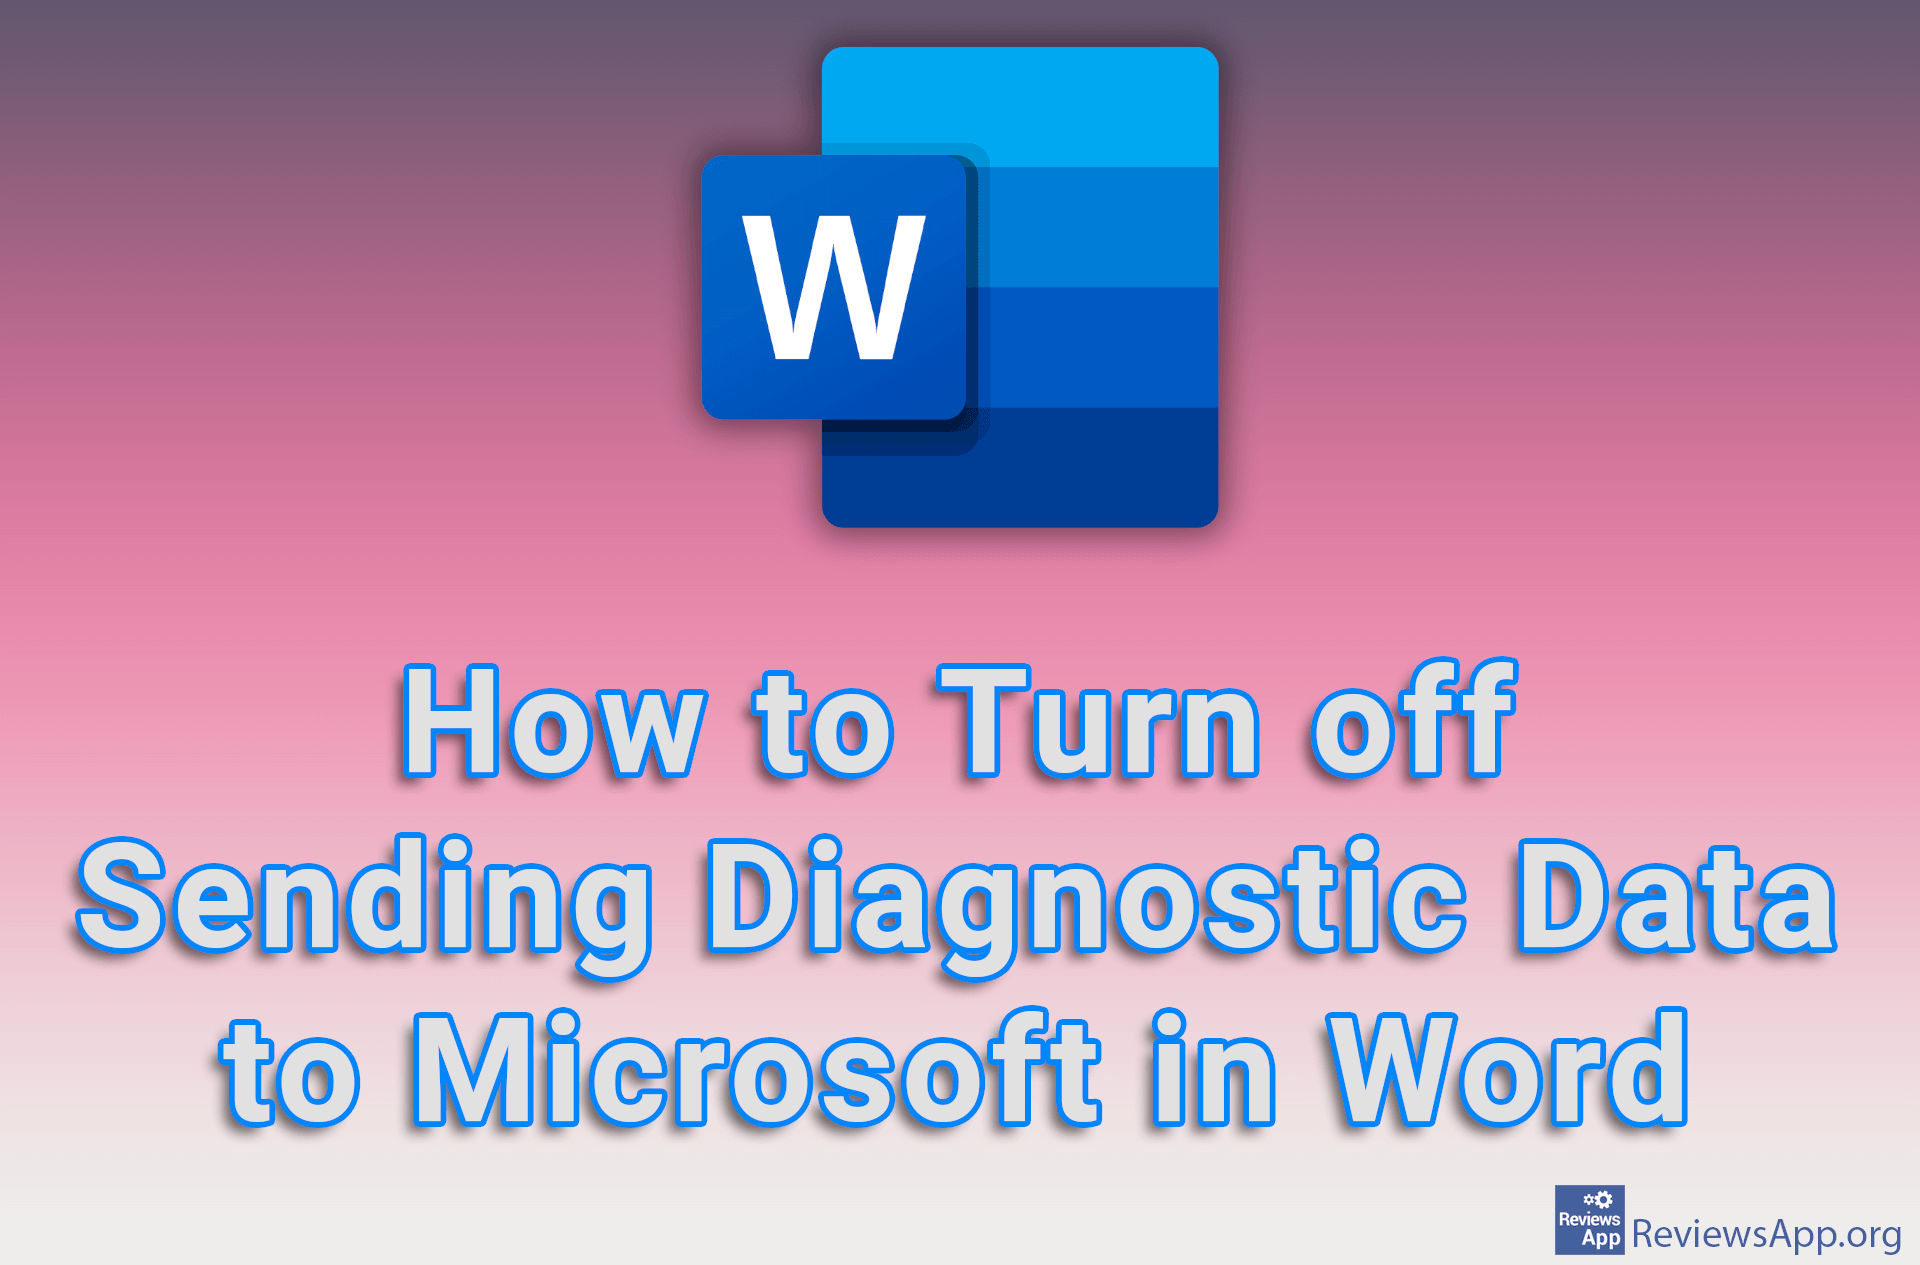 How to Turn off Sending Diagnostic Data to Microsoft in Word